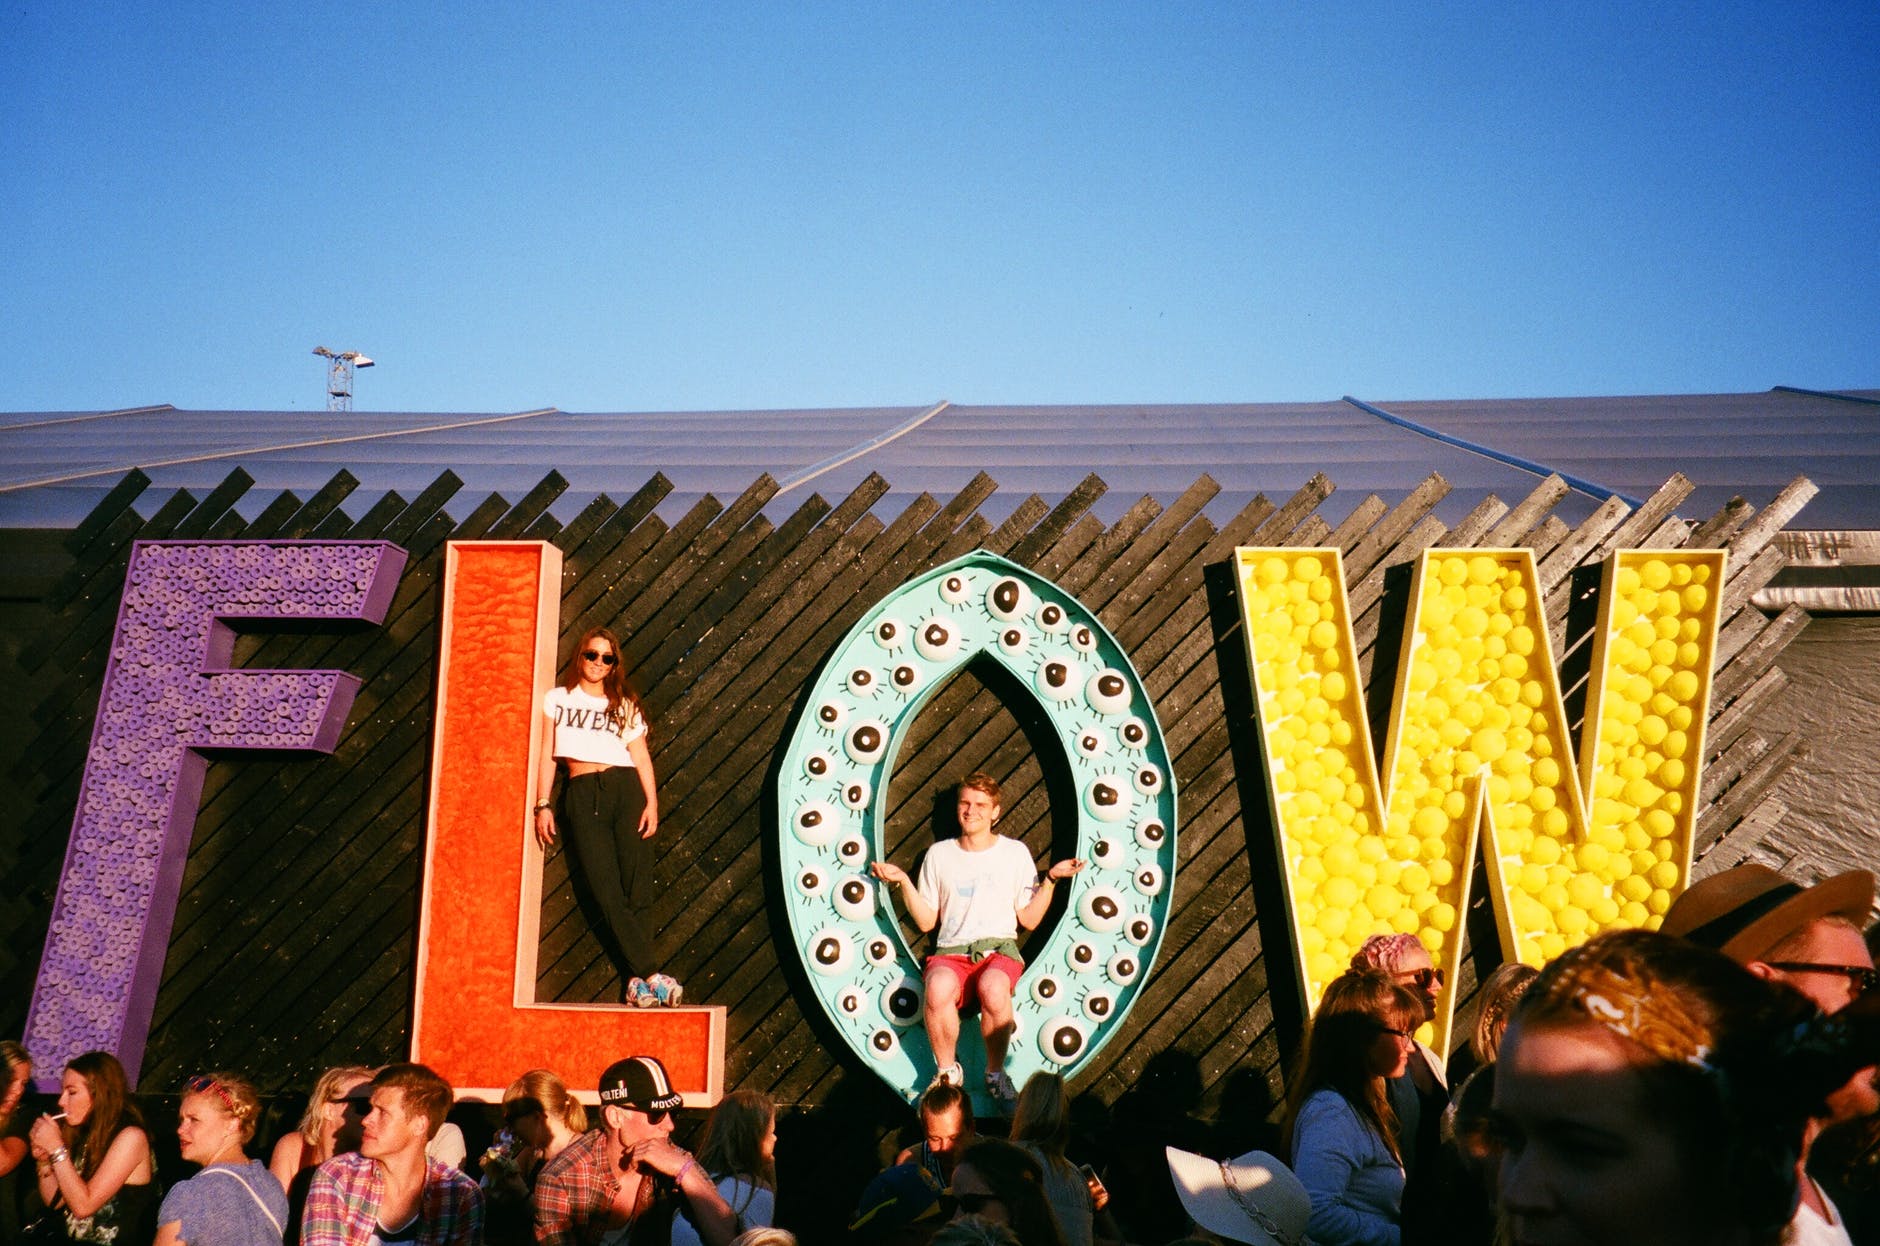 The word flow in giant letters at a festival